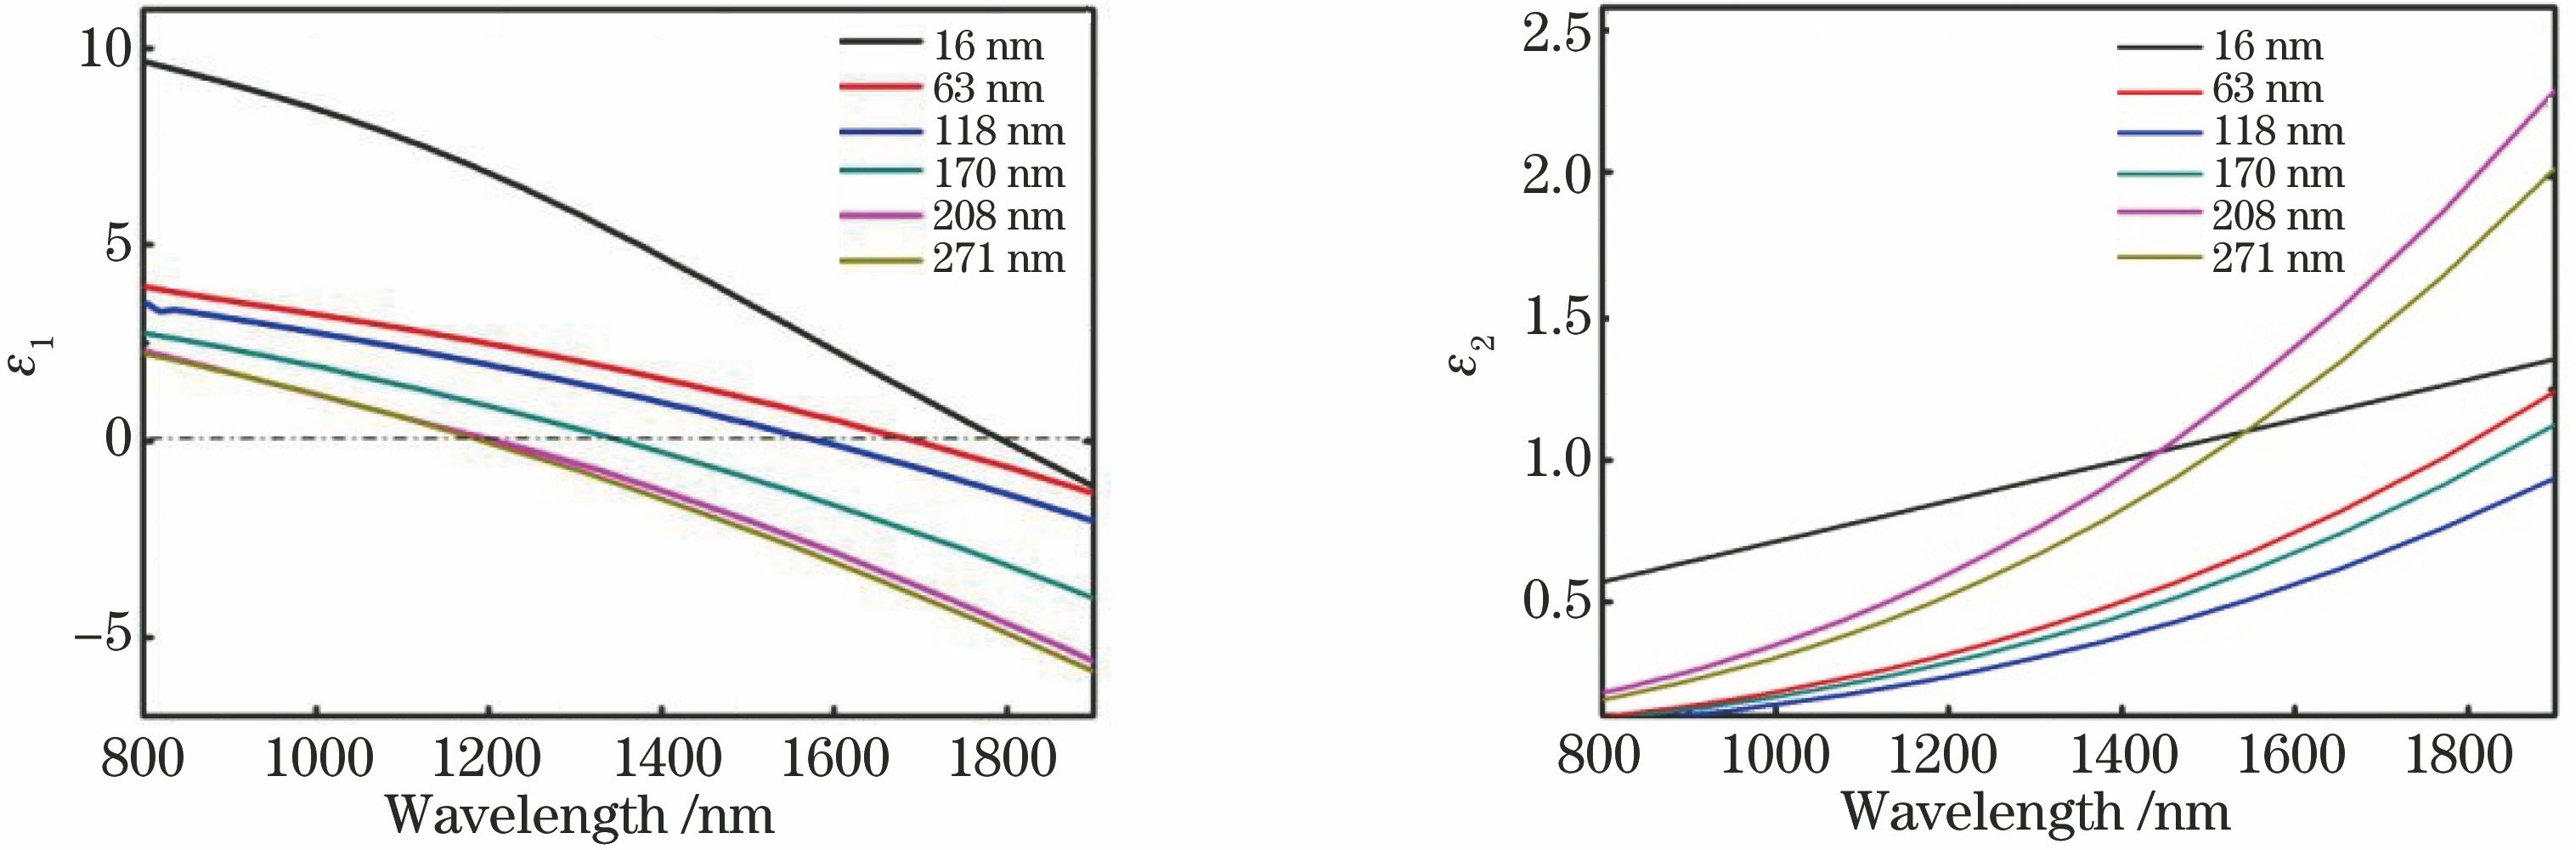 Dielectric permittivity of ITO films with different thicknesses. (a) Real part; (b) imaginary part